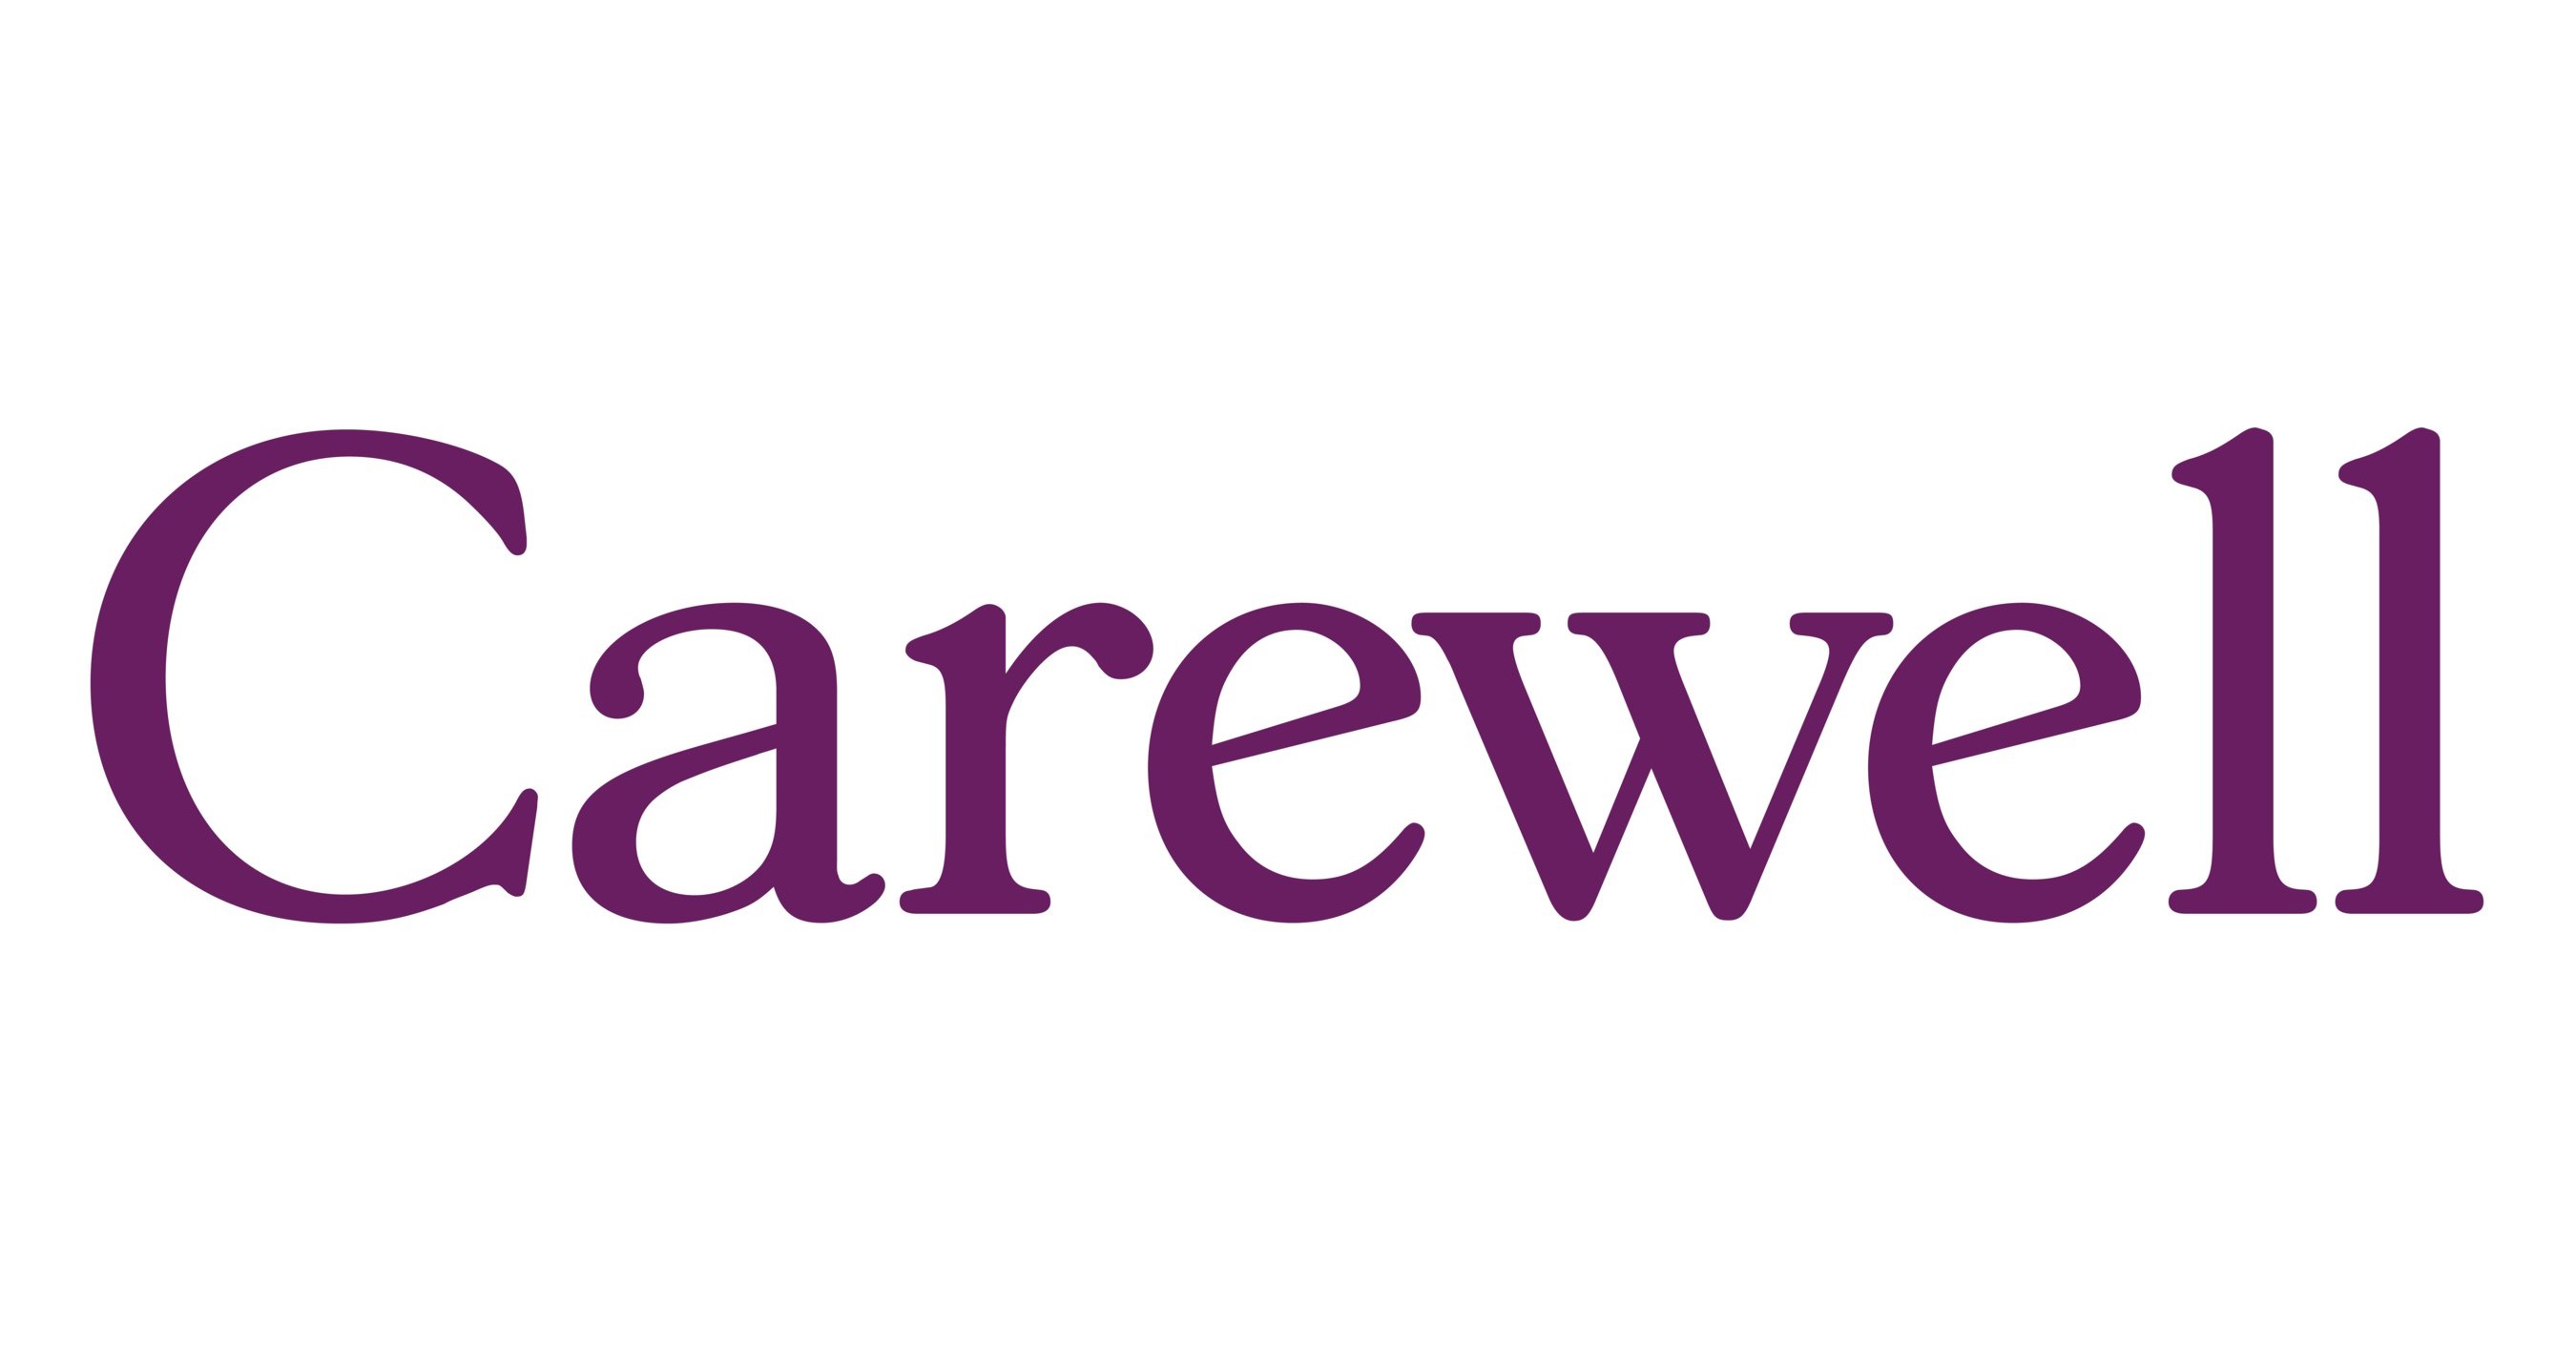 Carewell Ranks No. 248 on the 2022 Inc. 5000 Annual List of the Fastest-growing Private Companies in the U.S.